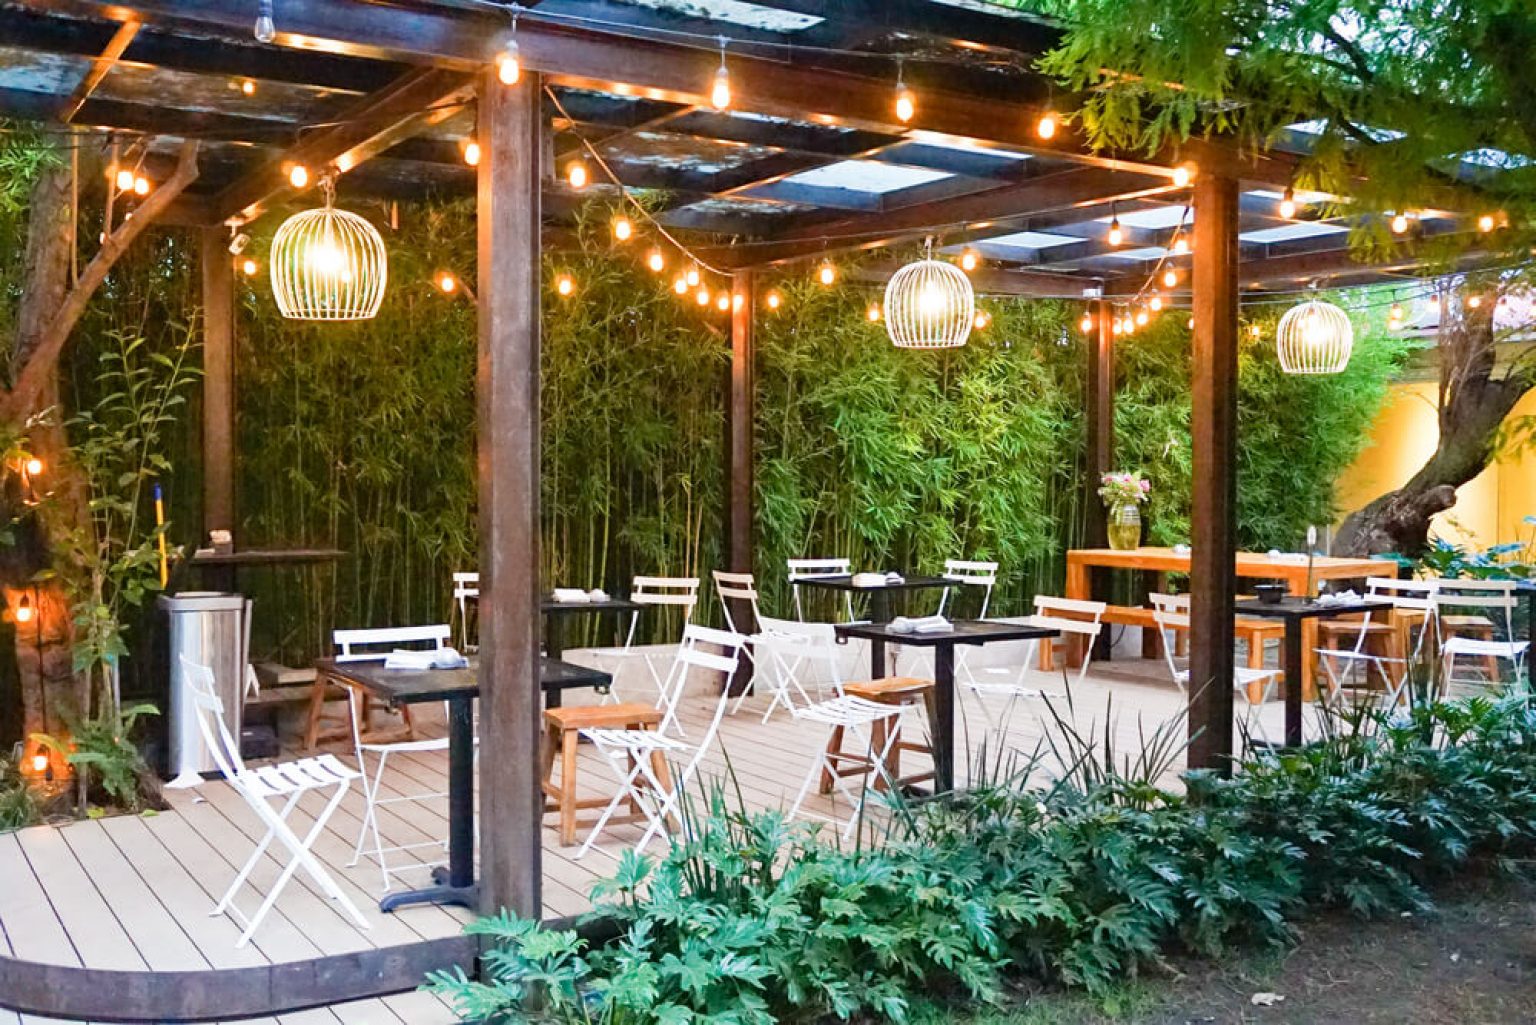 Best outdoor dining Chicago | Outdoor dining guide Chicago